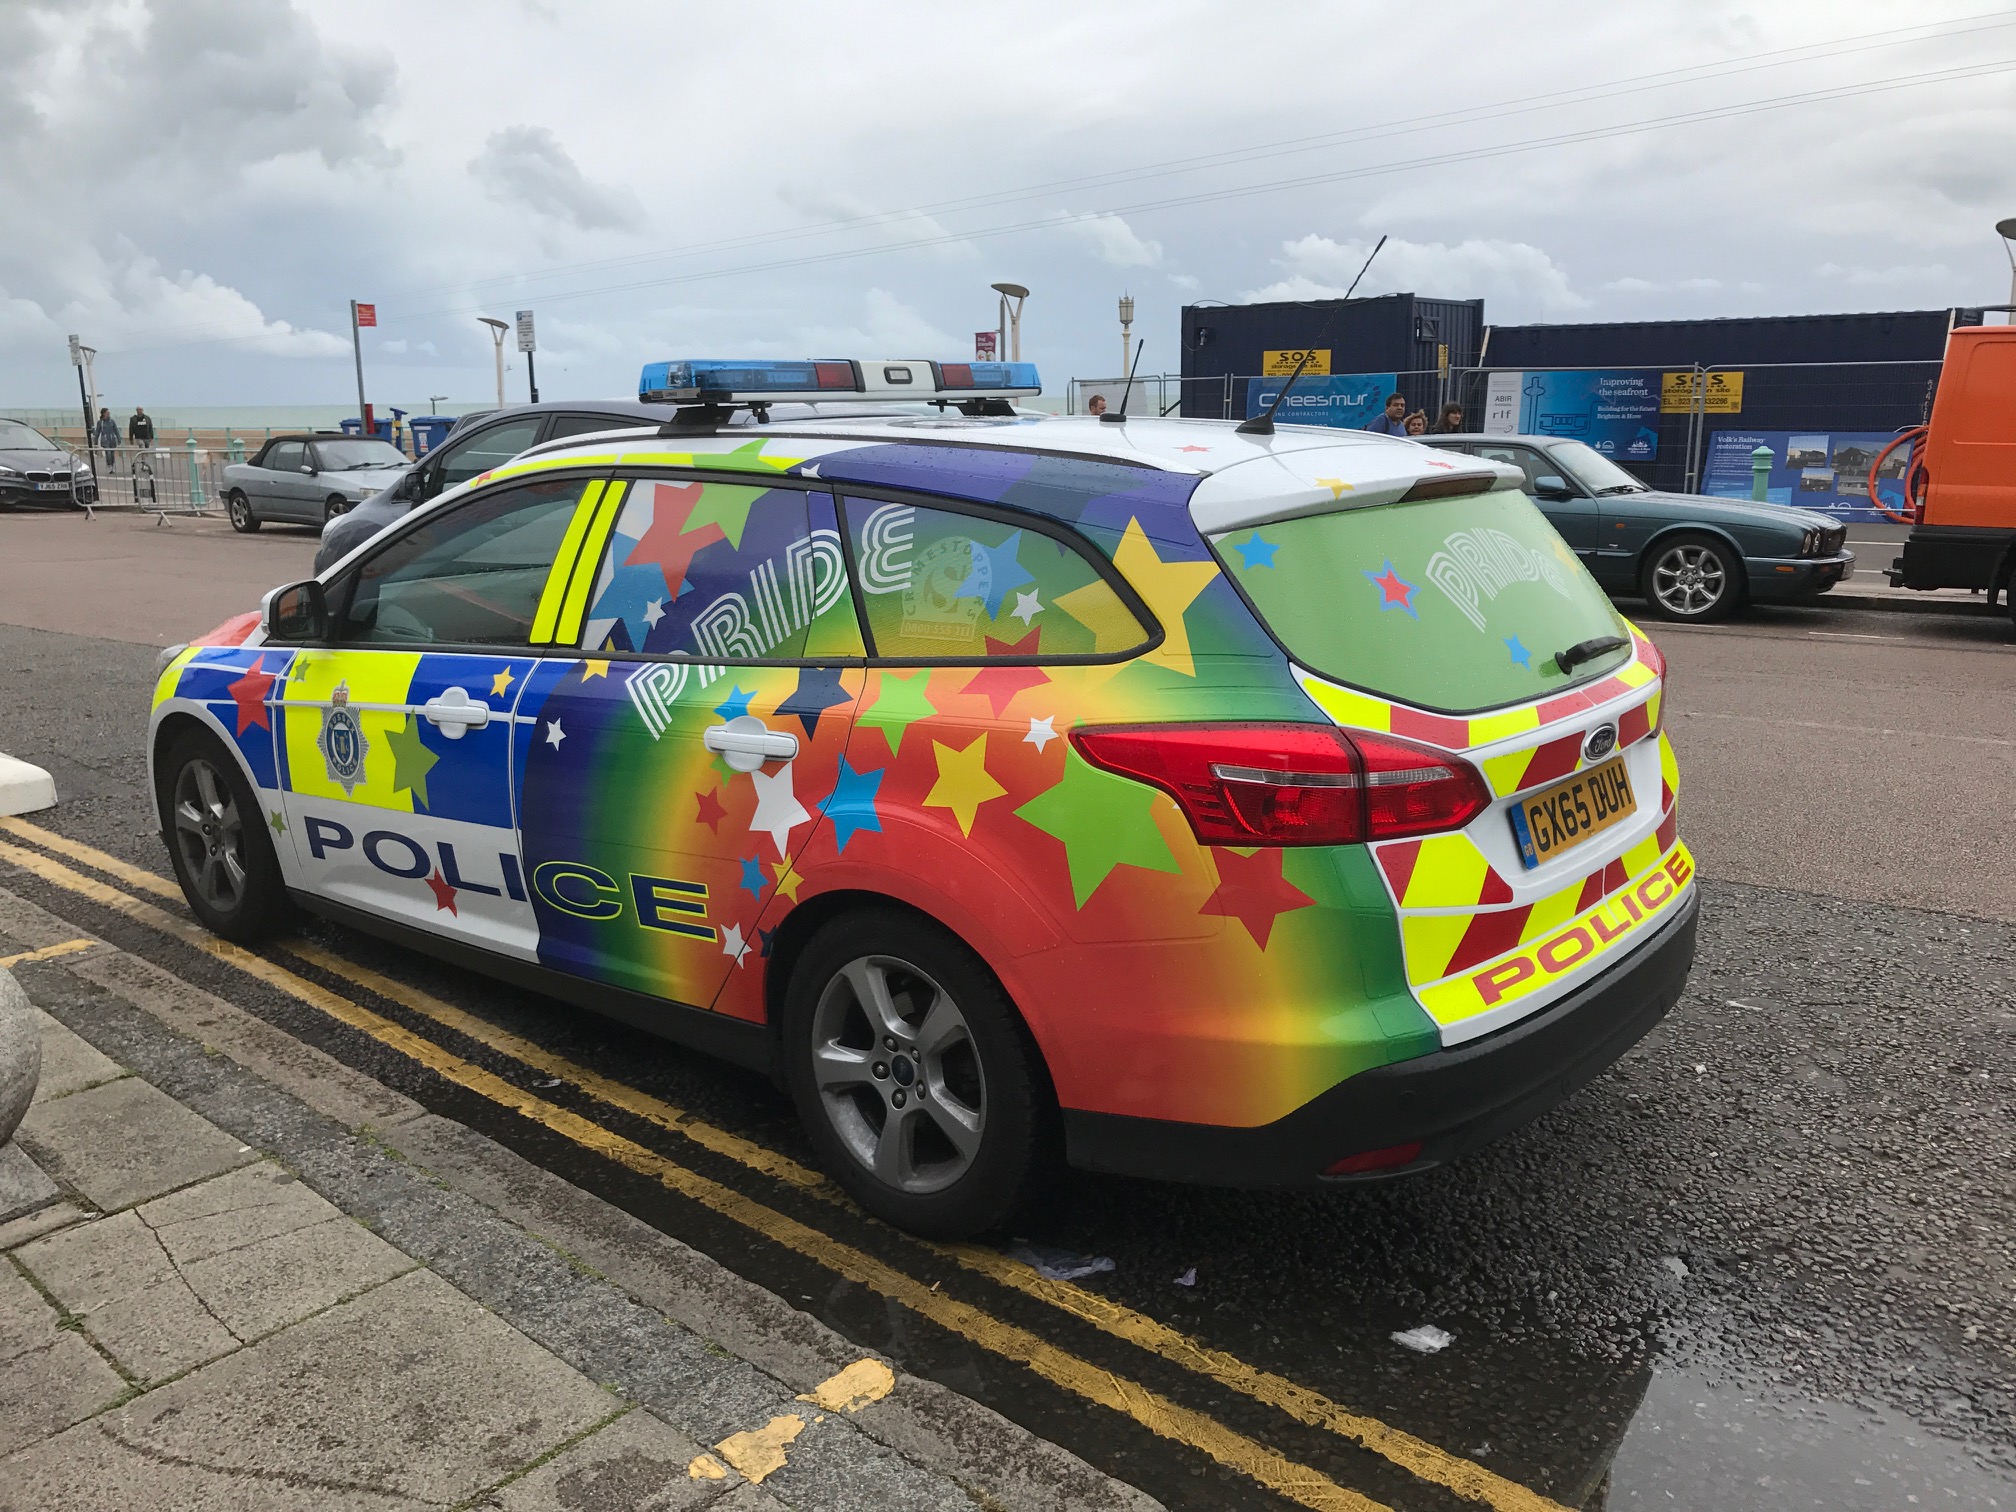 Brighton: Pride in our Police Force.